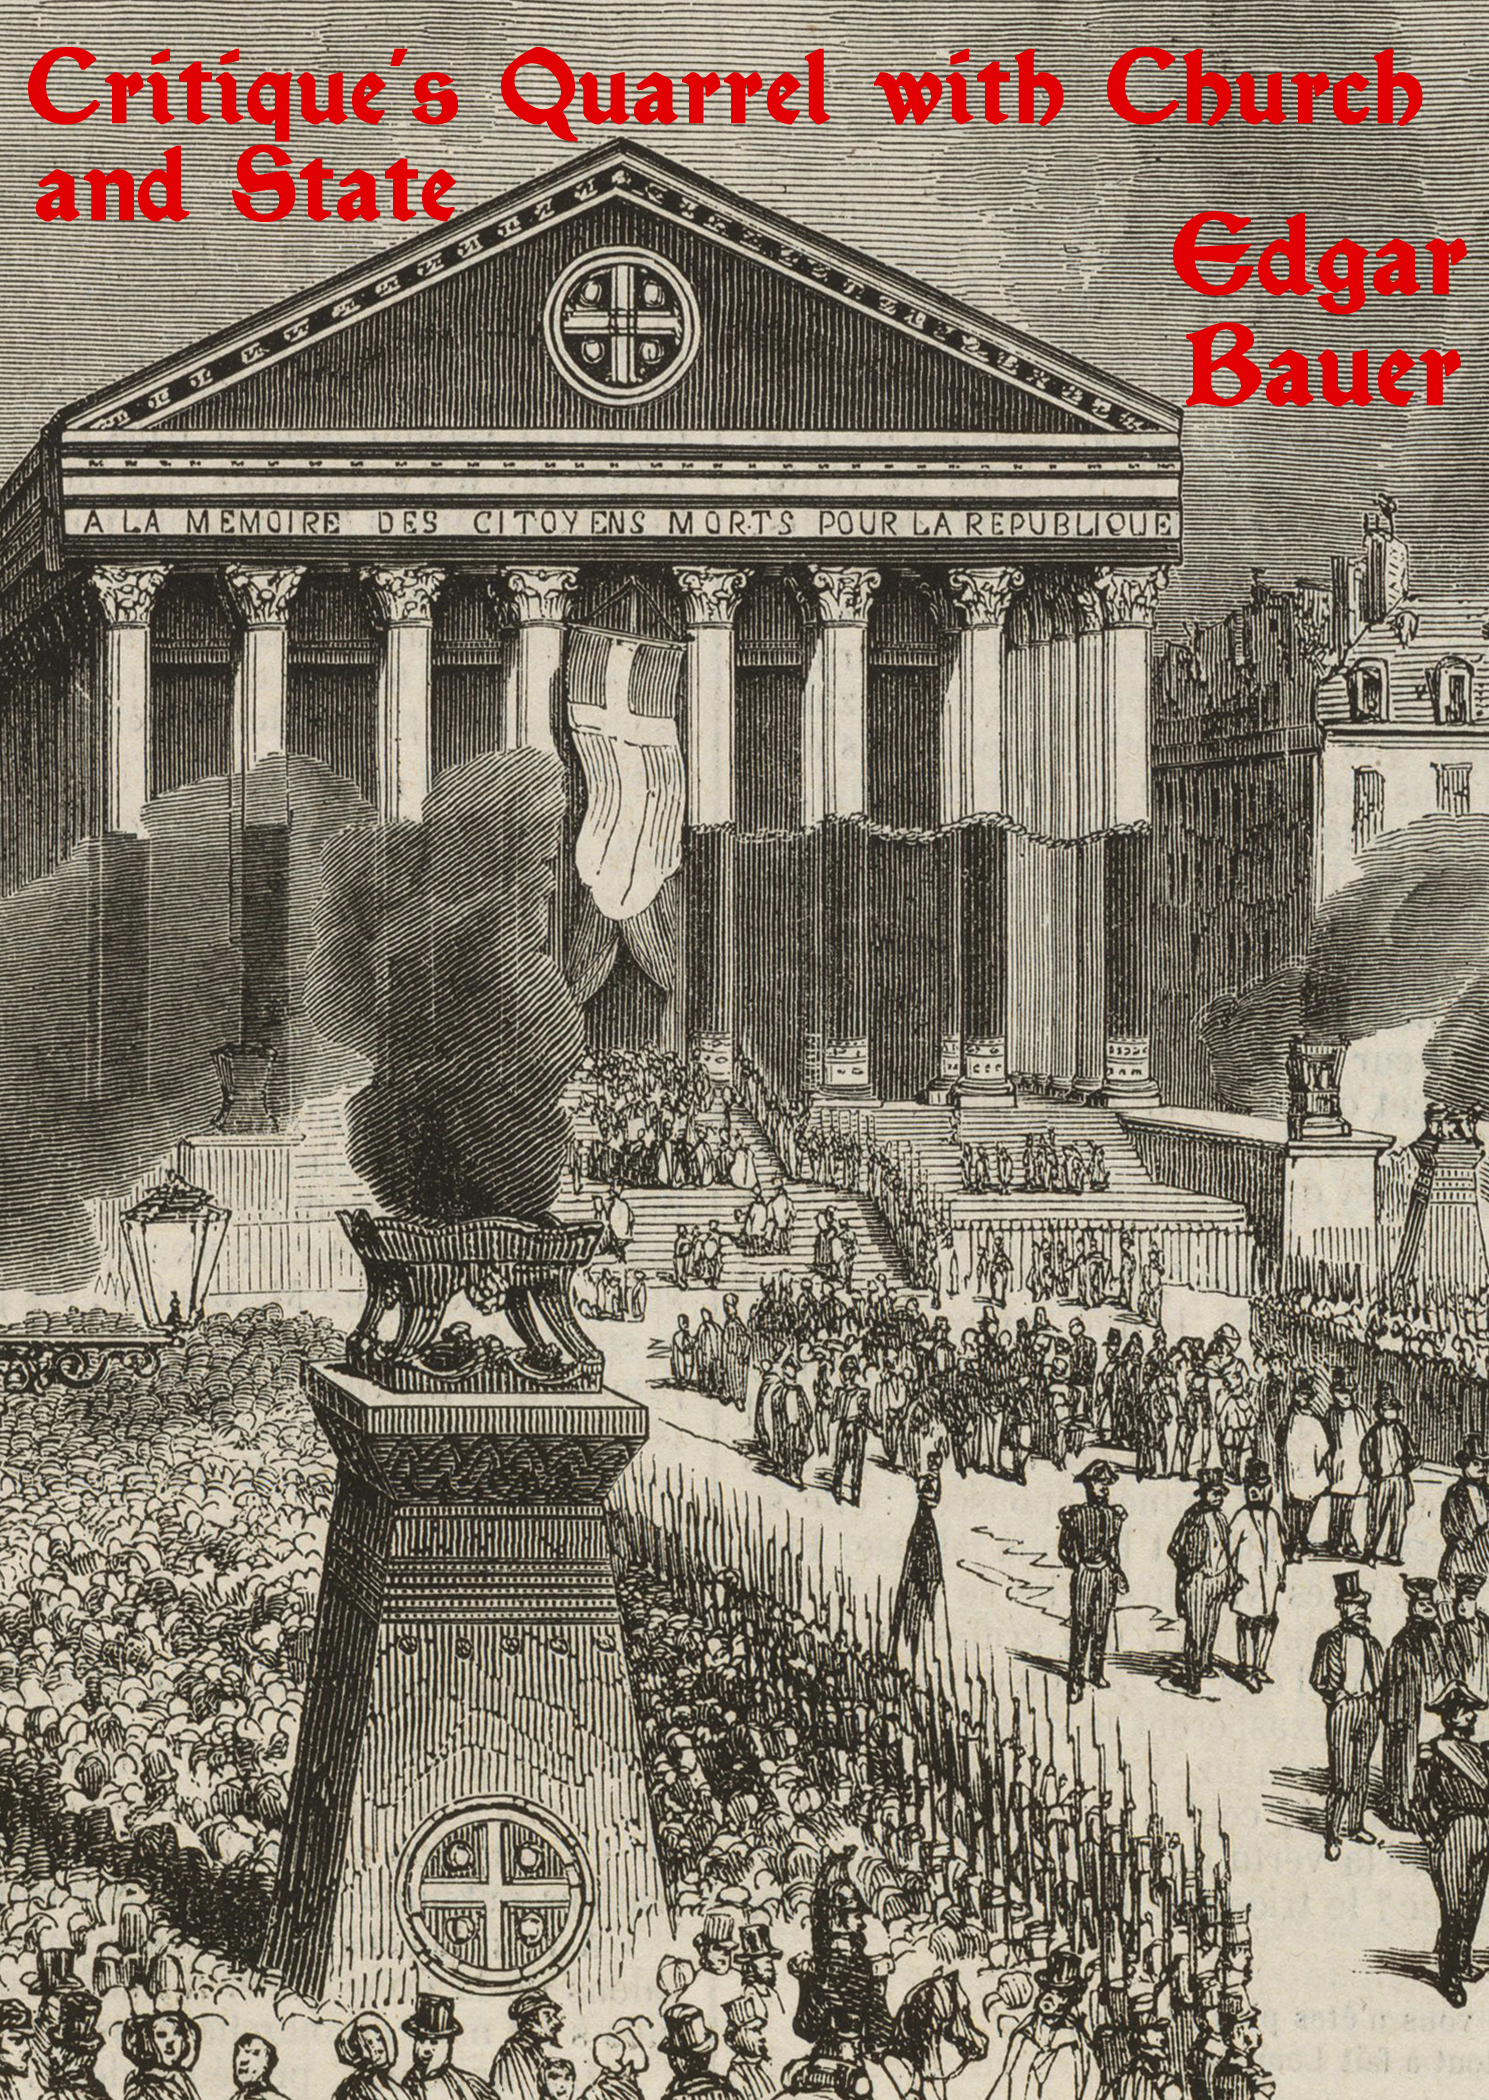 Critique's Quarrel with Church and State by Edgar Bauer